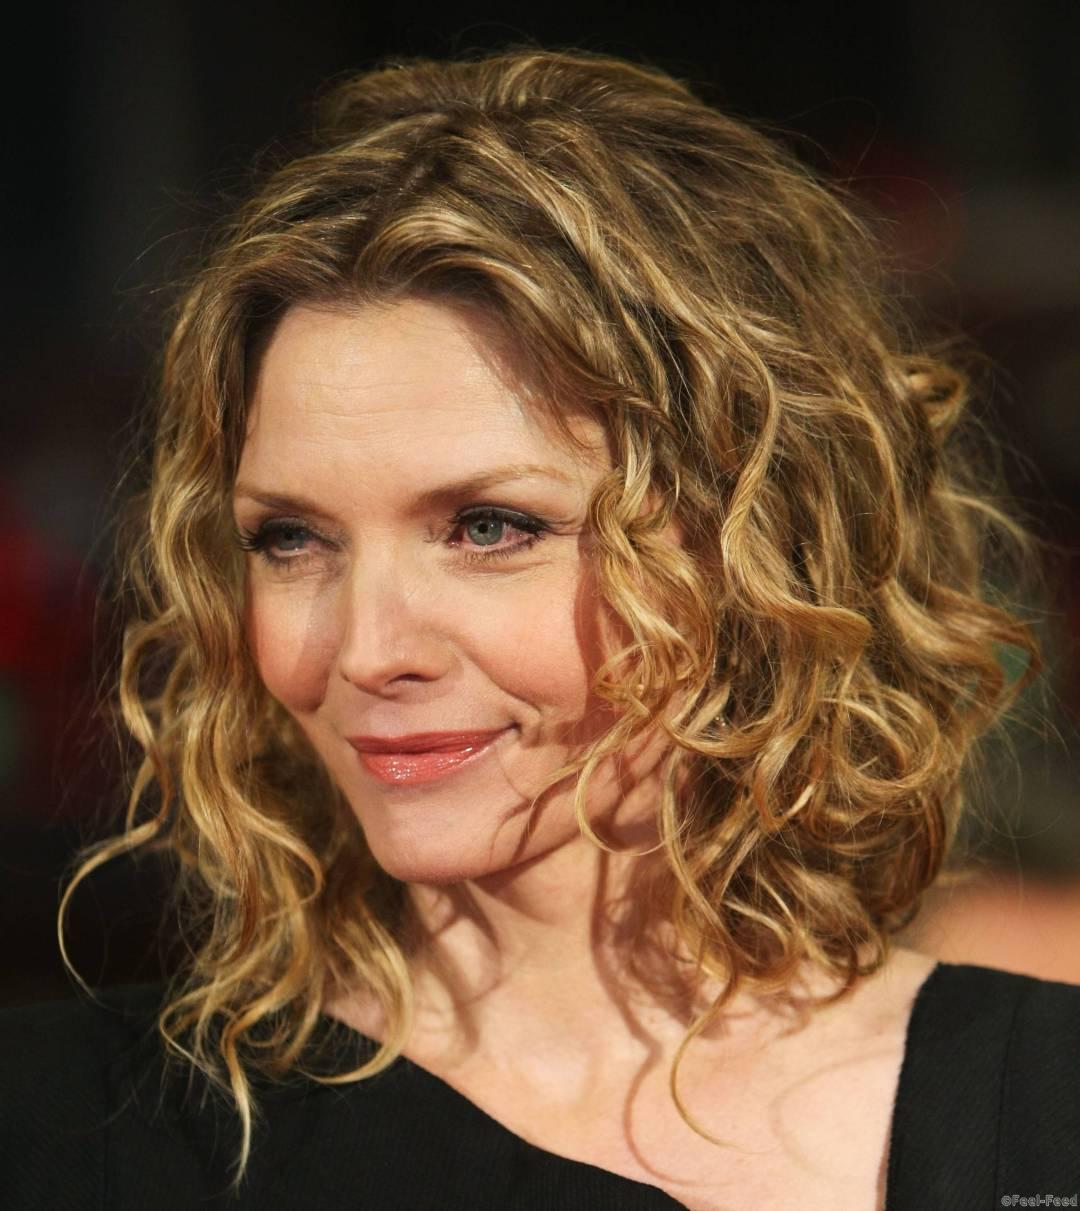 BERLIN - FEBRUARY 10:  Actress Michelle Pfeiffer attends the premiere for 'Cheri' as part of the 59th Berlin Film Festival at the Berlinale Palast on February 10, 2009 in Berlin, Germany.  (Photo by Sean Gallup/Getty Images)